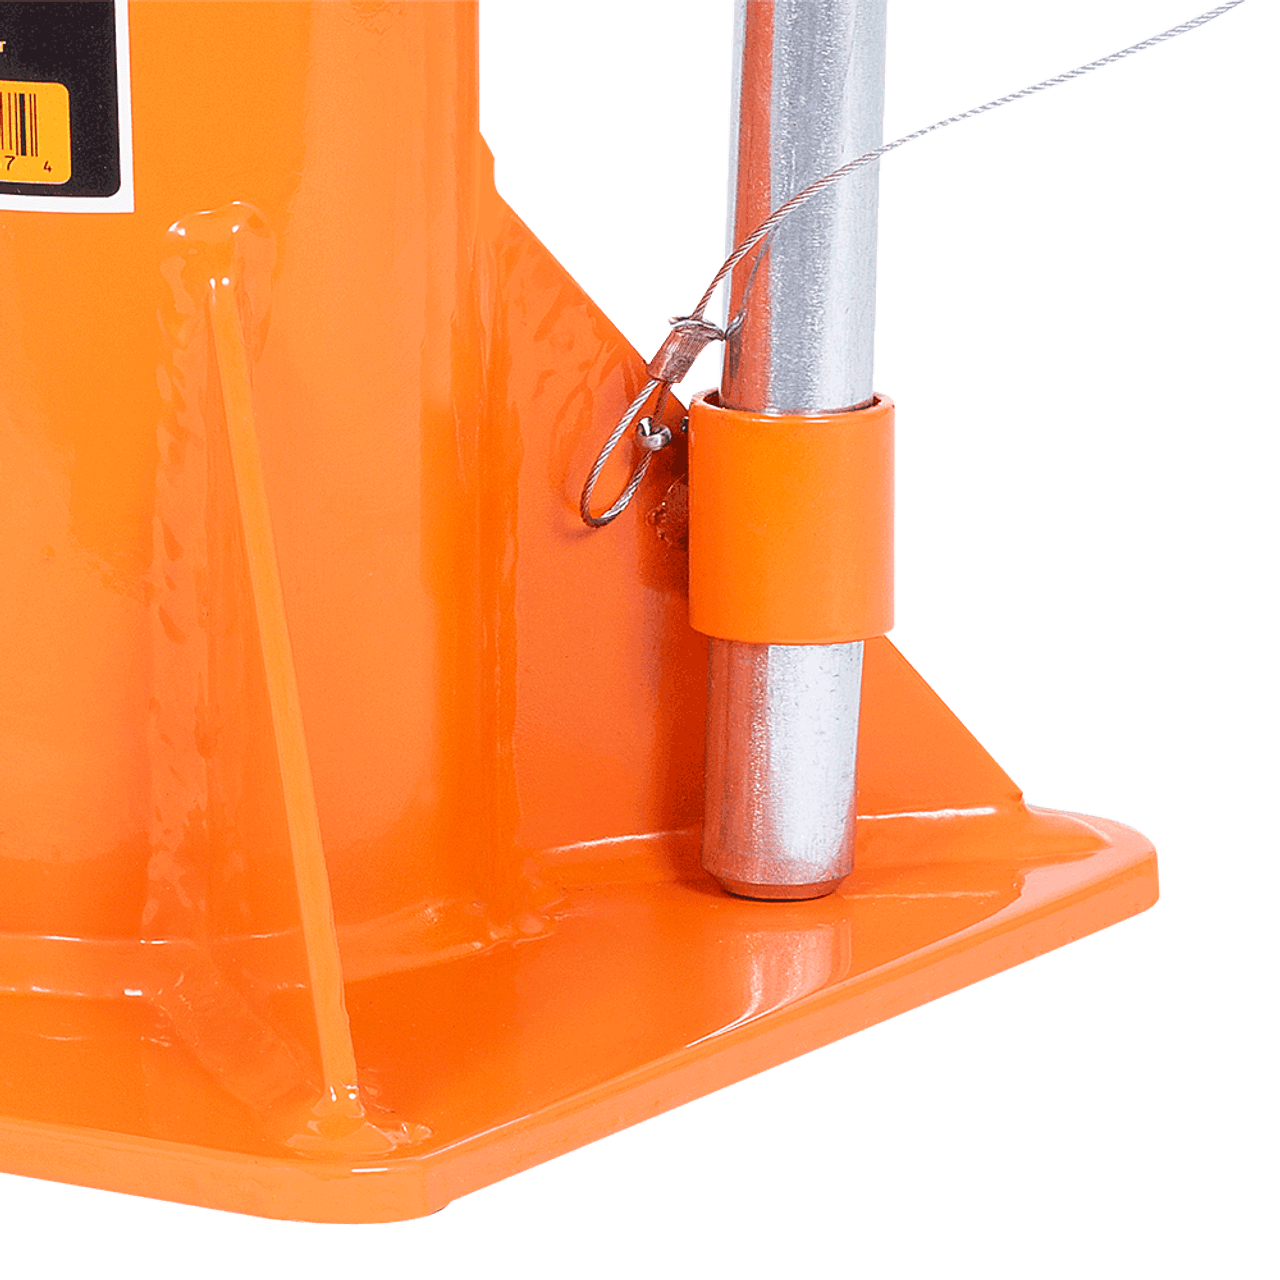 Strongarm 032229 - (878A) 20 Ton Pin Style Jack Stand - Heavy Duty